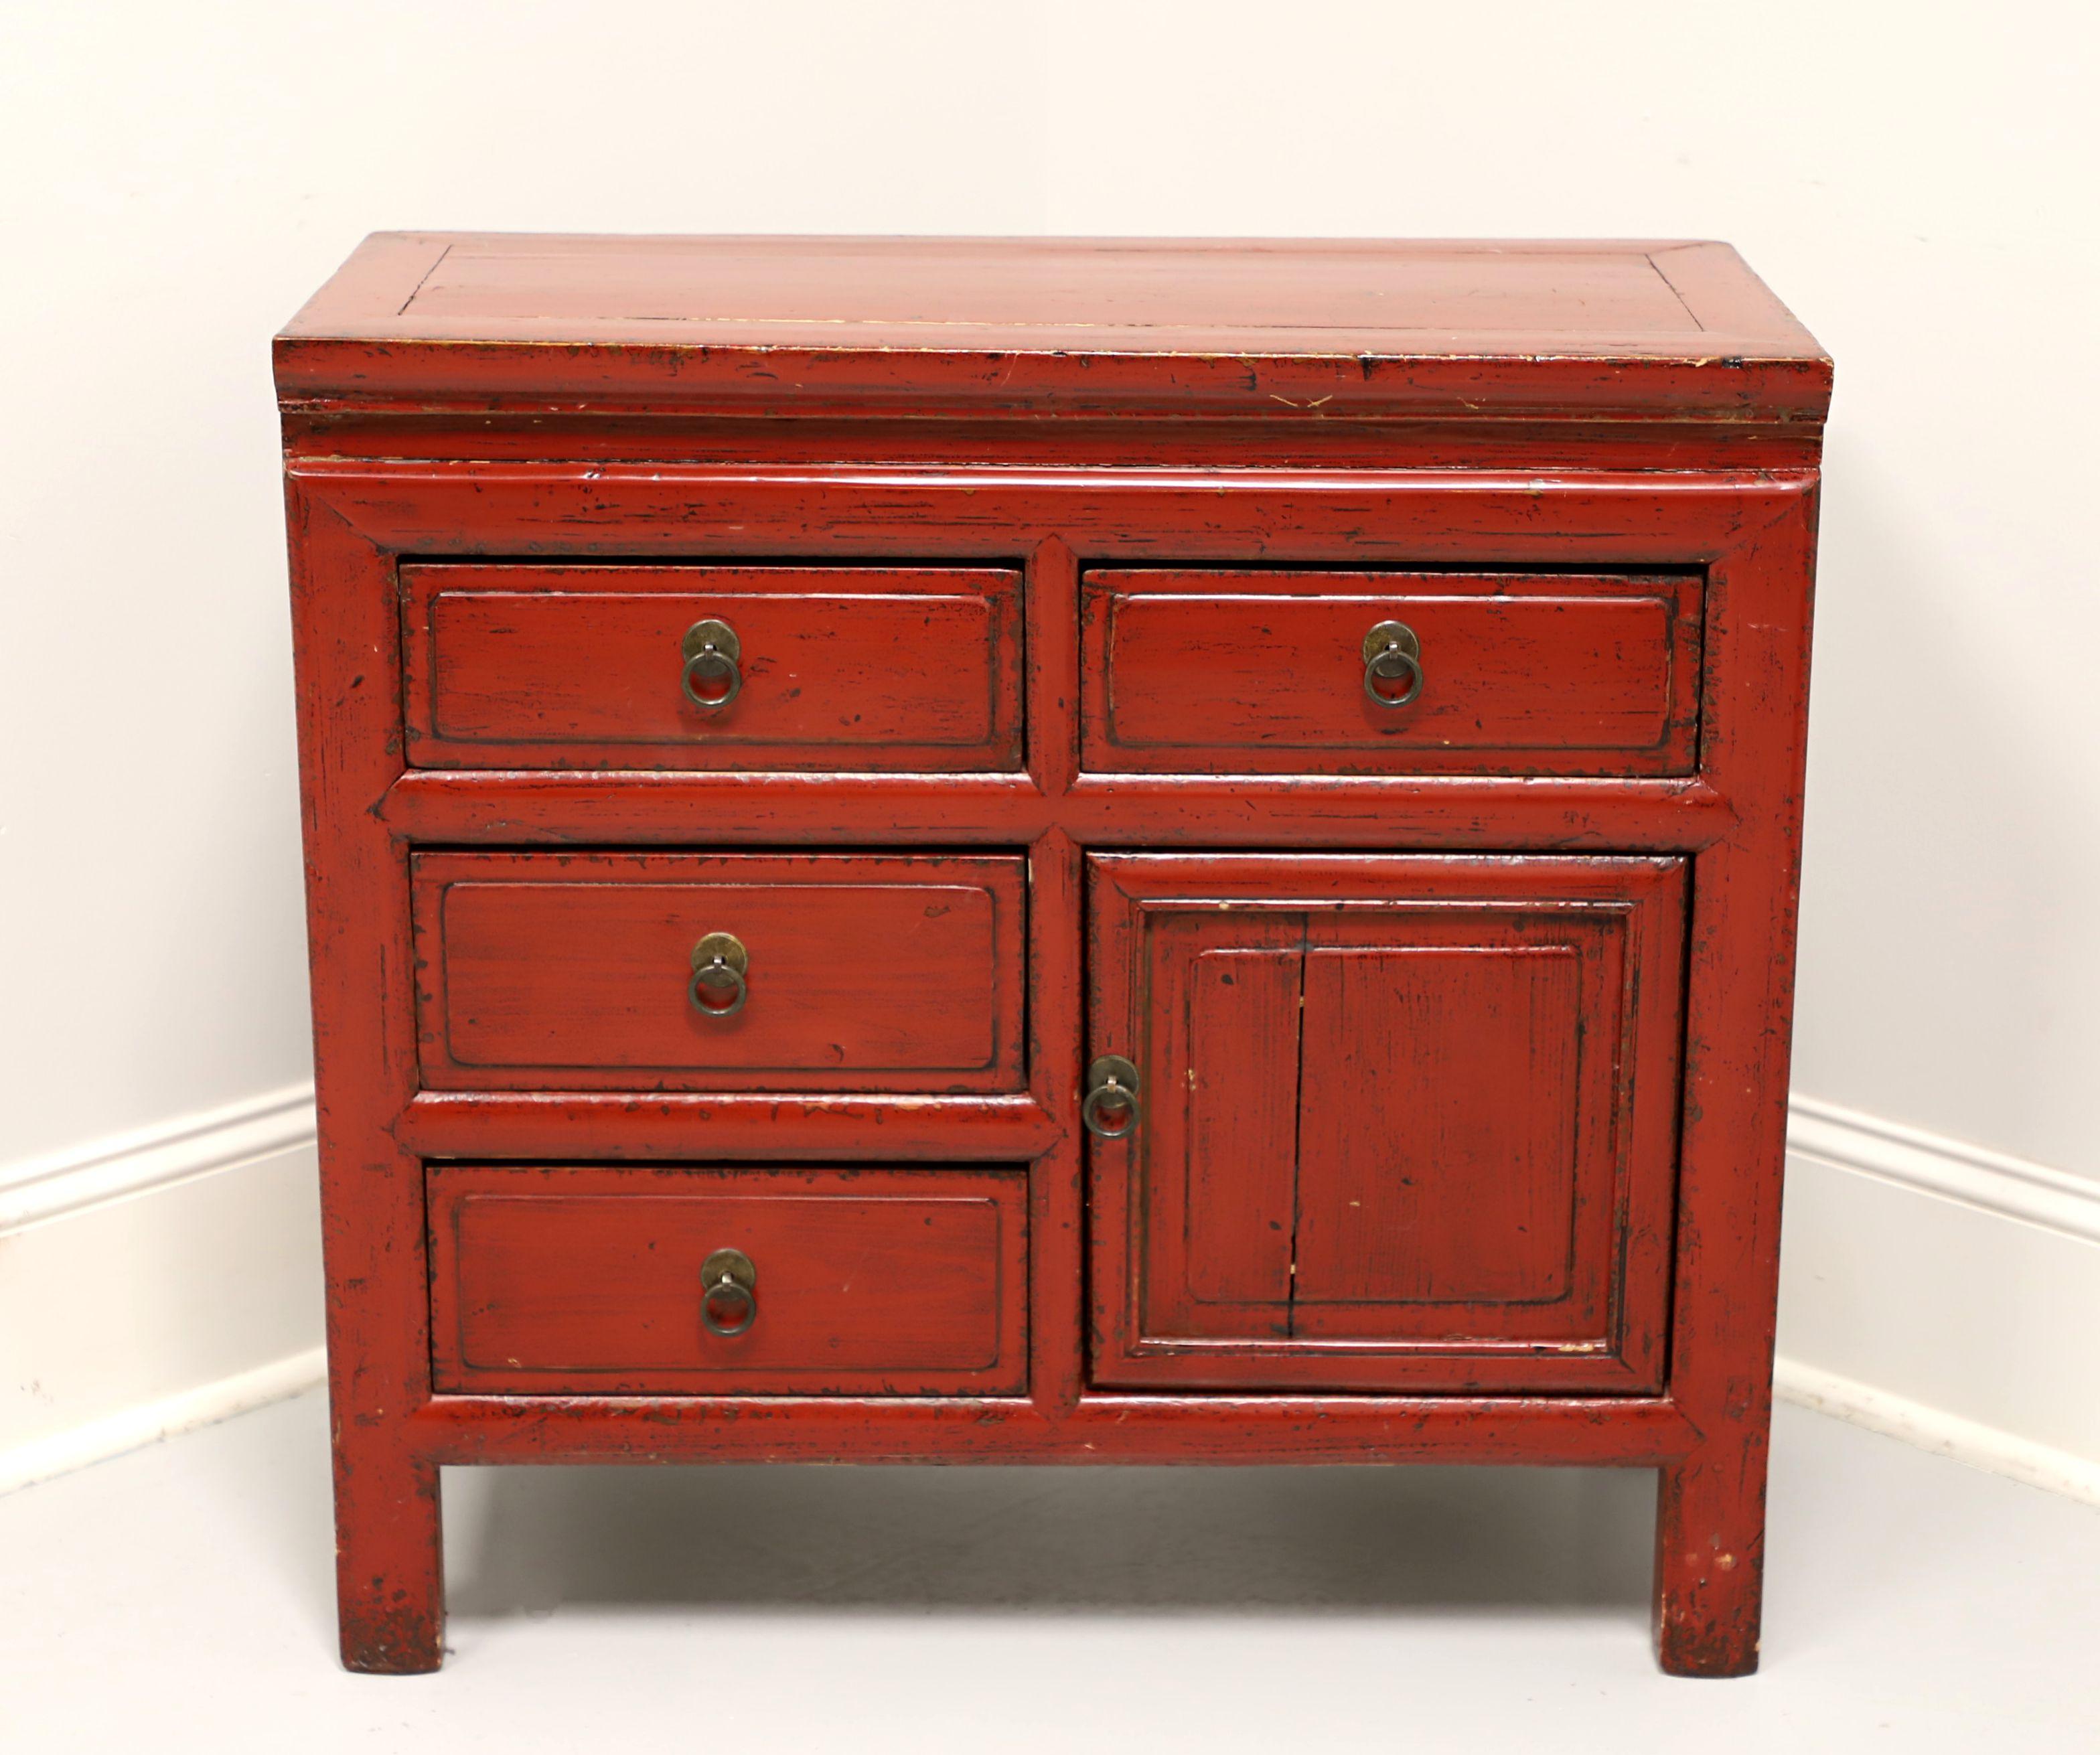 An antique Asian Chinoiserie style console cabinet, unbranded. Solid fir painted red, banded top, metal hardware, and block feet. Features two upper drawers over two lower drawers and a side one door cabinet revealing storage. All drawers are of